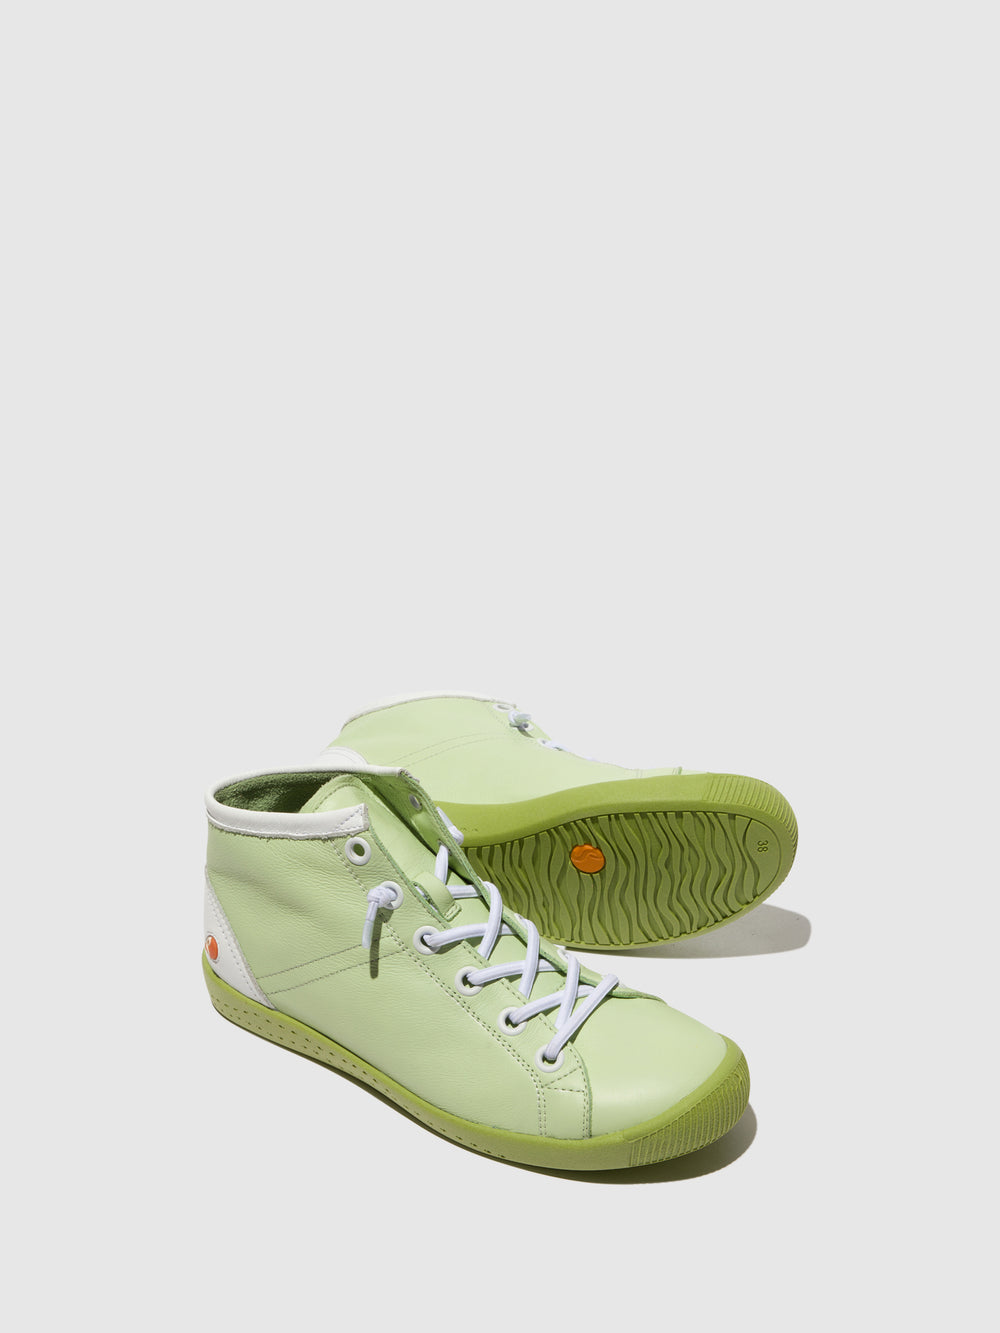 Elasticated Ankle Boots ISLEEN586SOF LIGHT GREEN (AVOCADO SOLE)